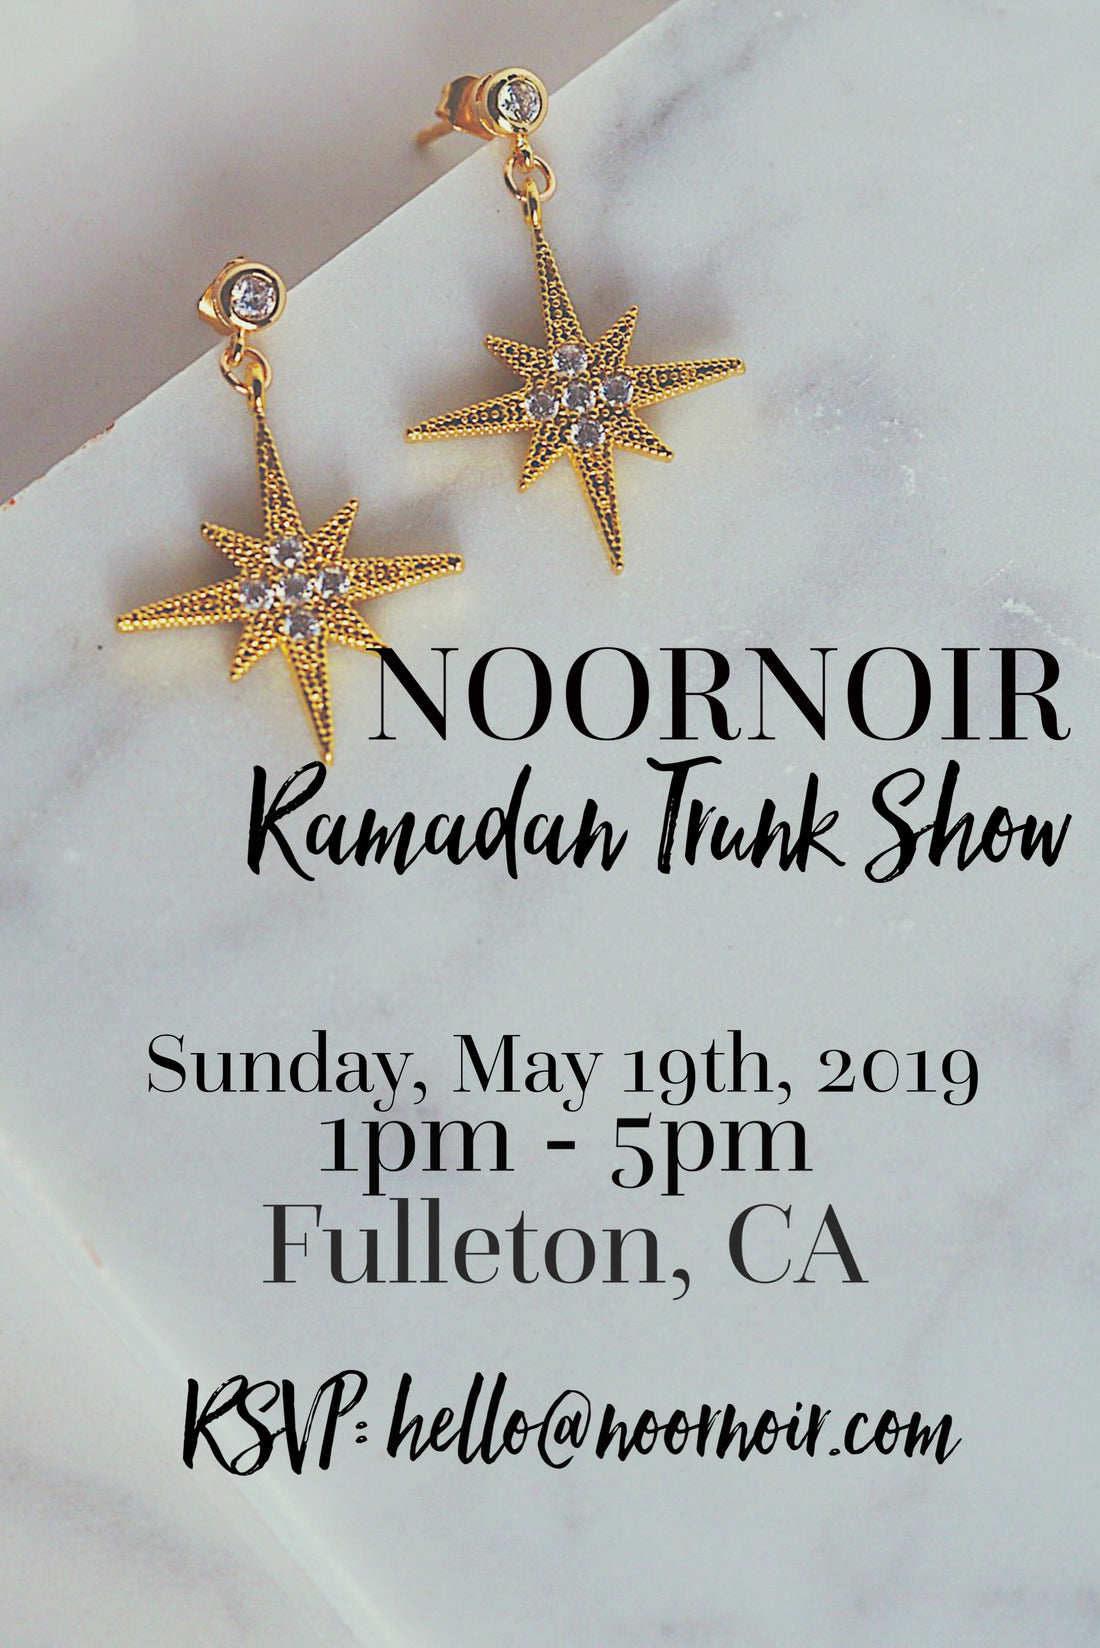 Save the Date: May 19 Trunk Show in Fullerton, CA